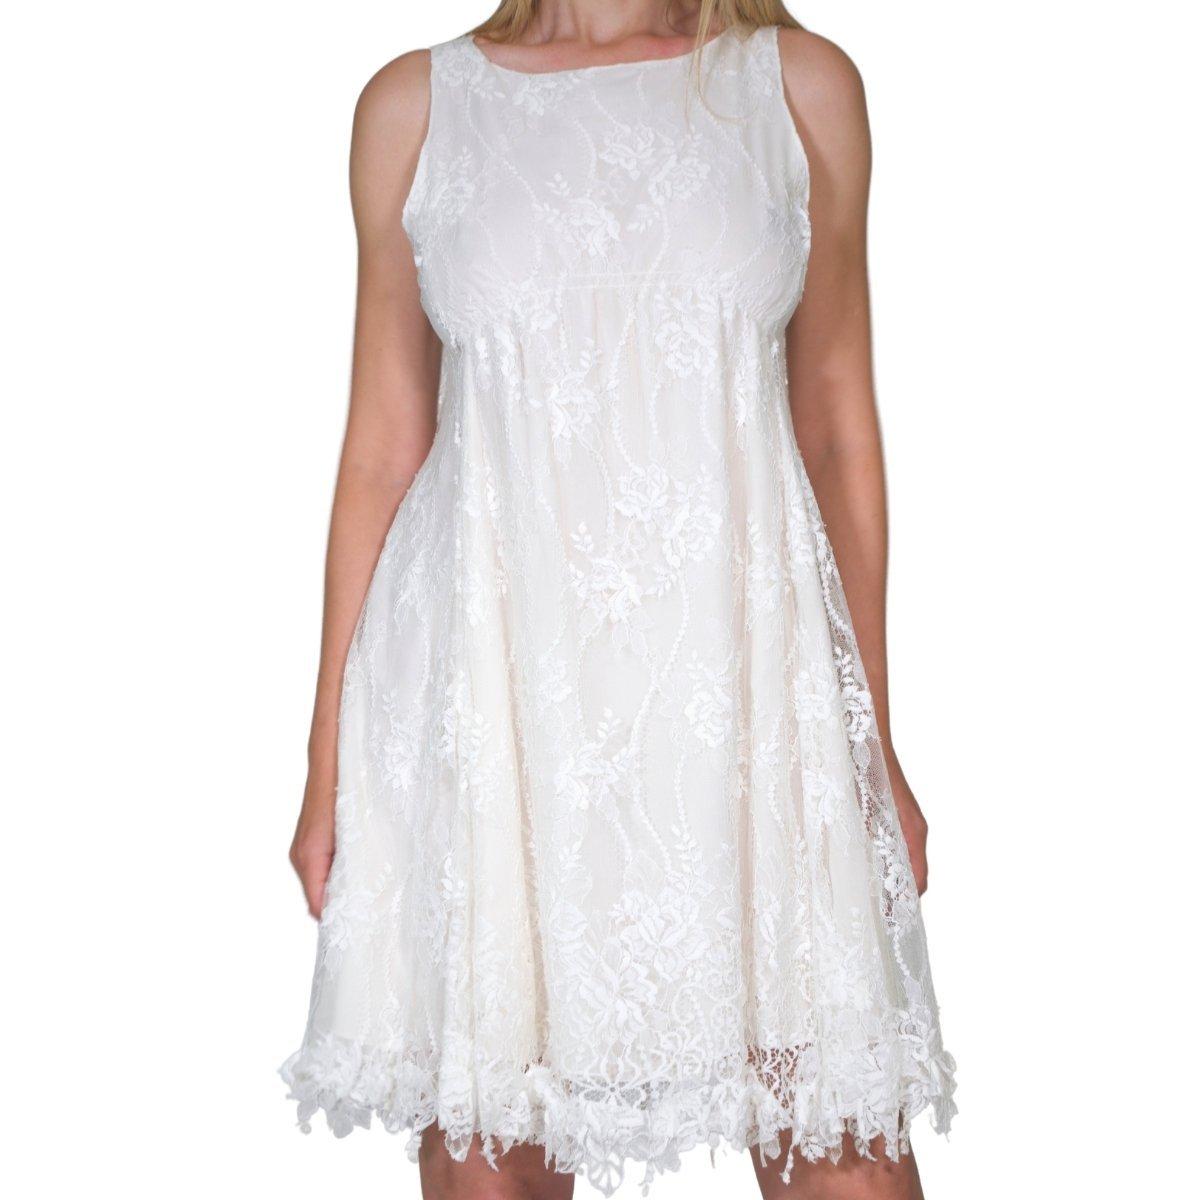 Nina Ricci White Cotton Blend Lace Dress FR36  In New Condition For Sale In Brossard, QC